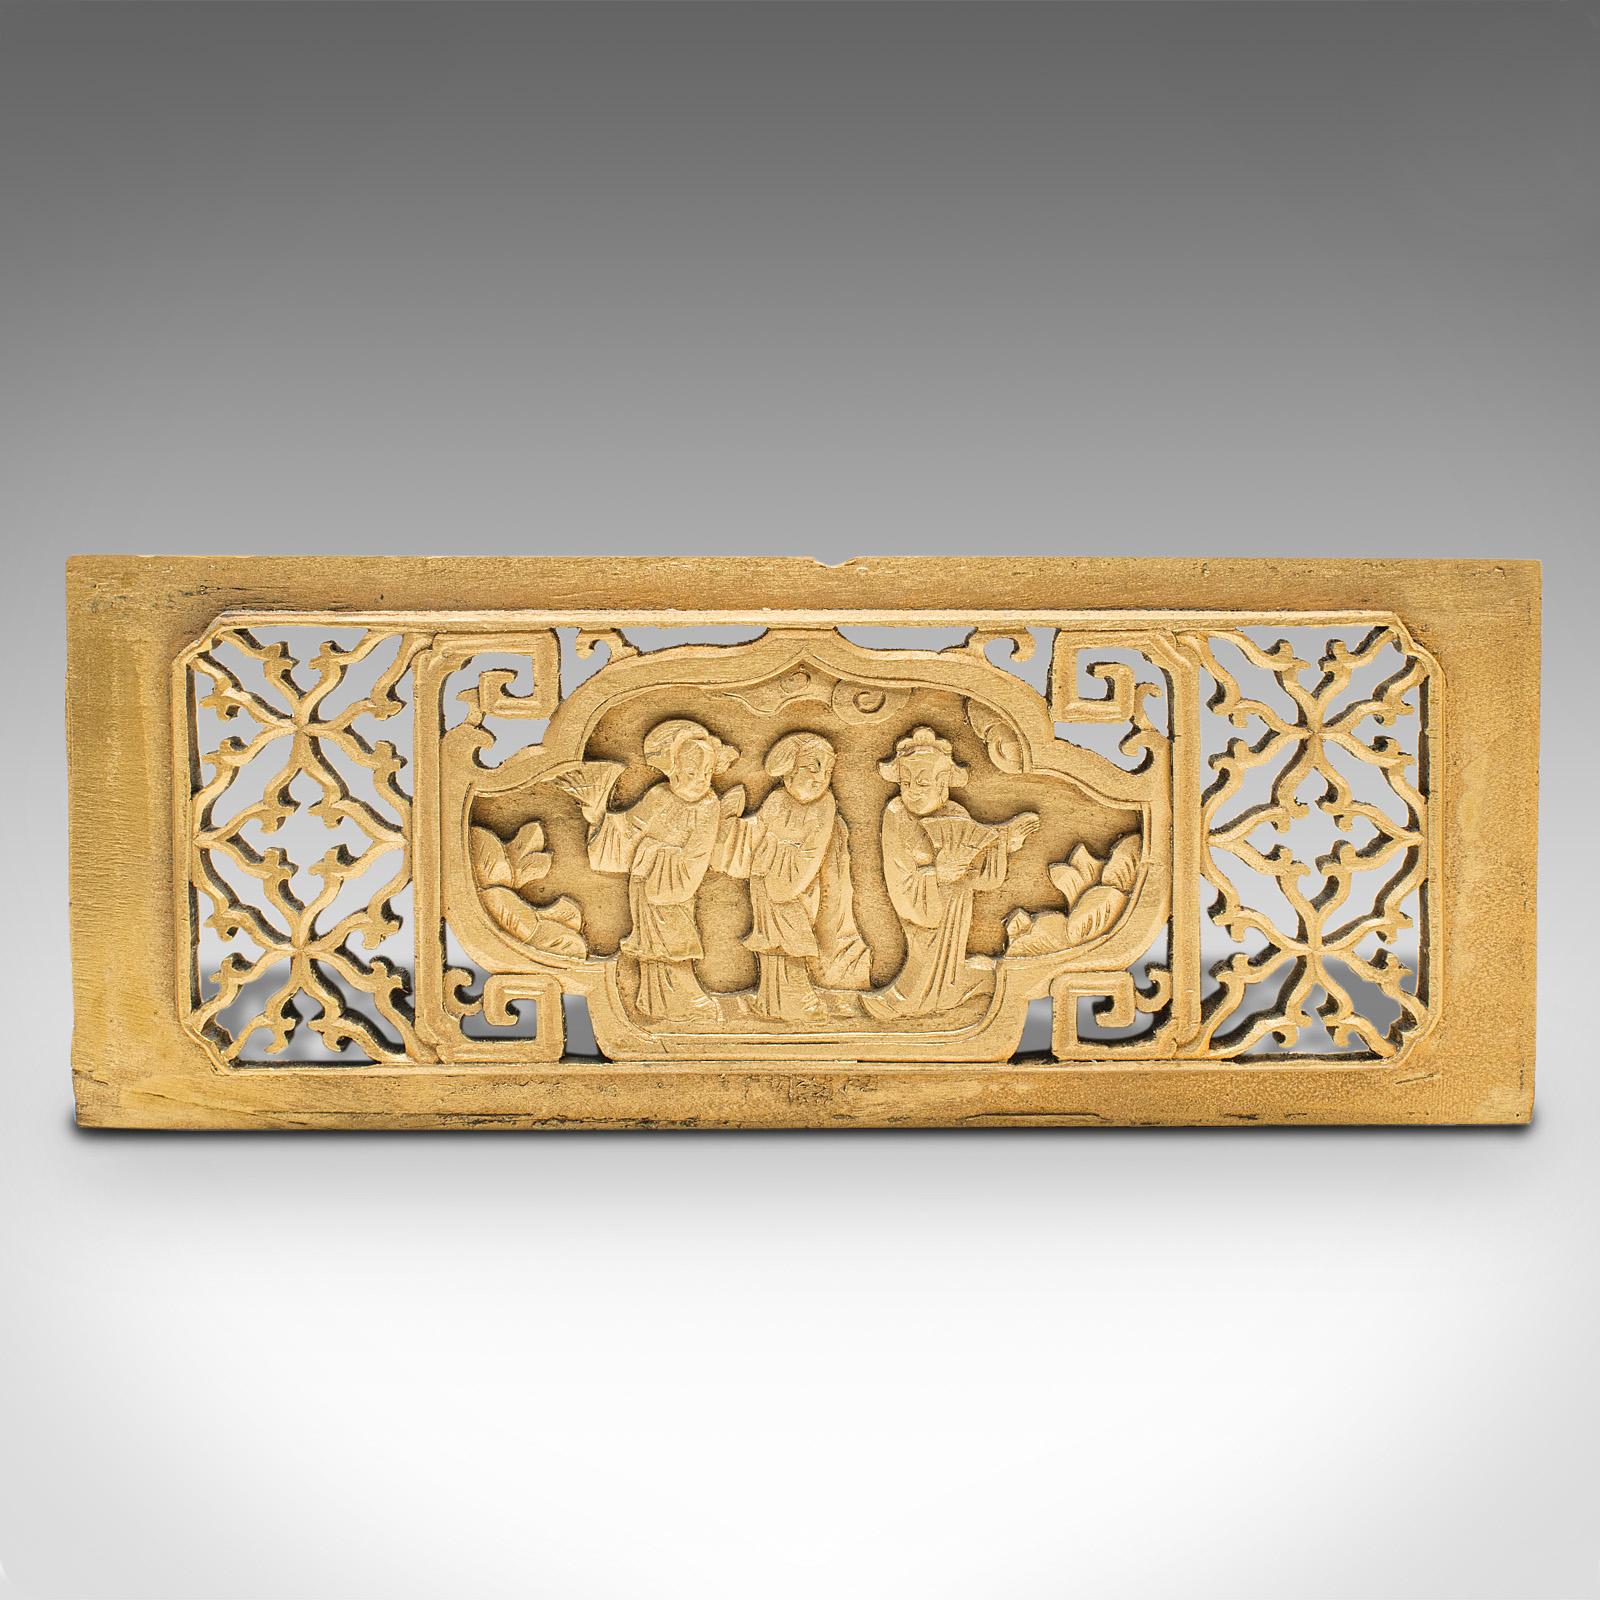 This is a pair of decorative panels. A Japanese, gilt mahogany carved fretwork inset, dating to the late Victorian period, circa 1900.

Unusual and fascinating, with excellent cared craftsmanship
Displaying a desirable aged patina